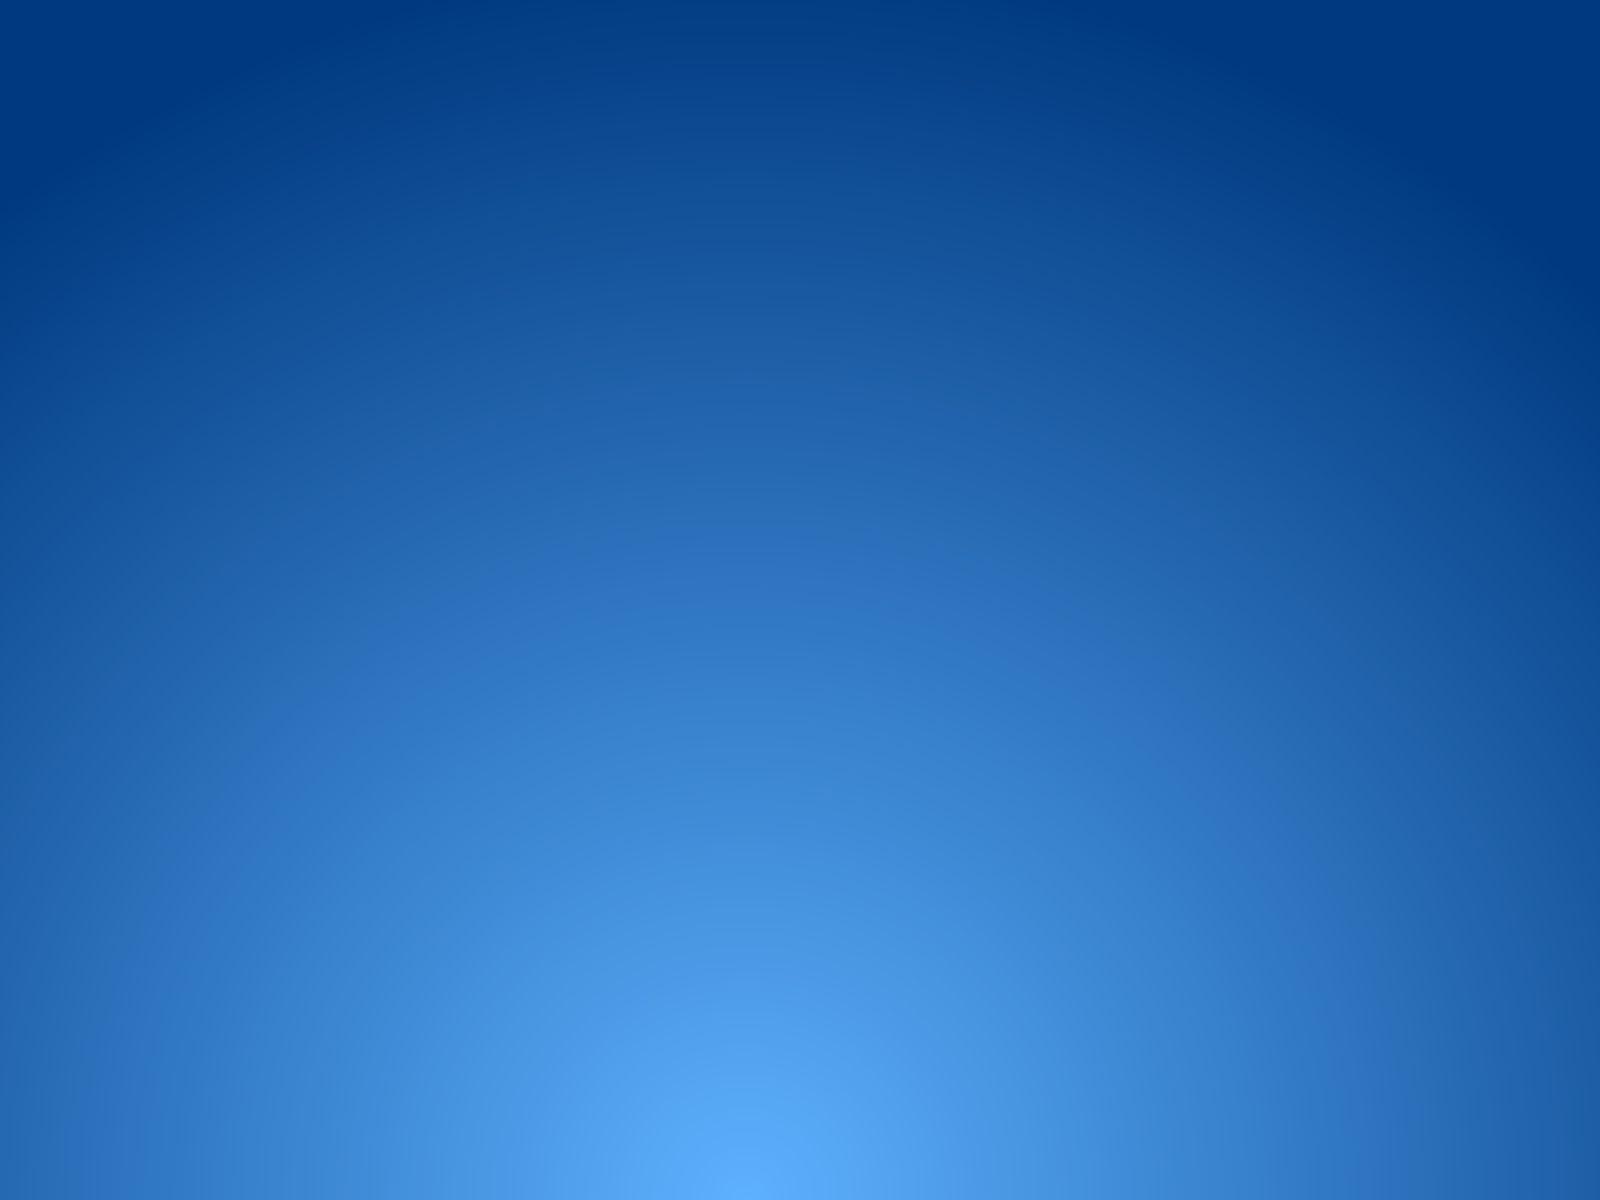 Wallpapers For > Blue Radial Gradient Backgrounds